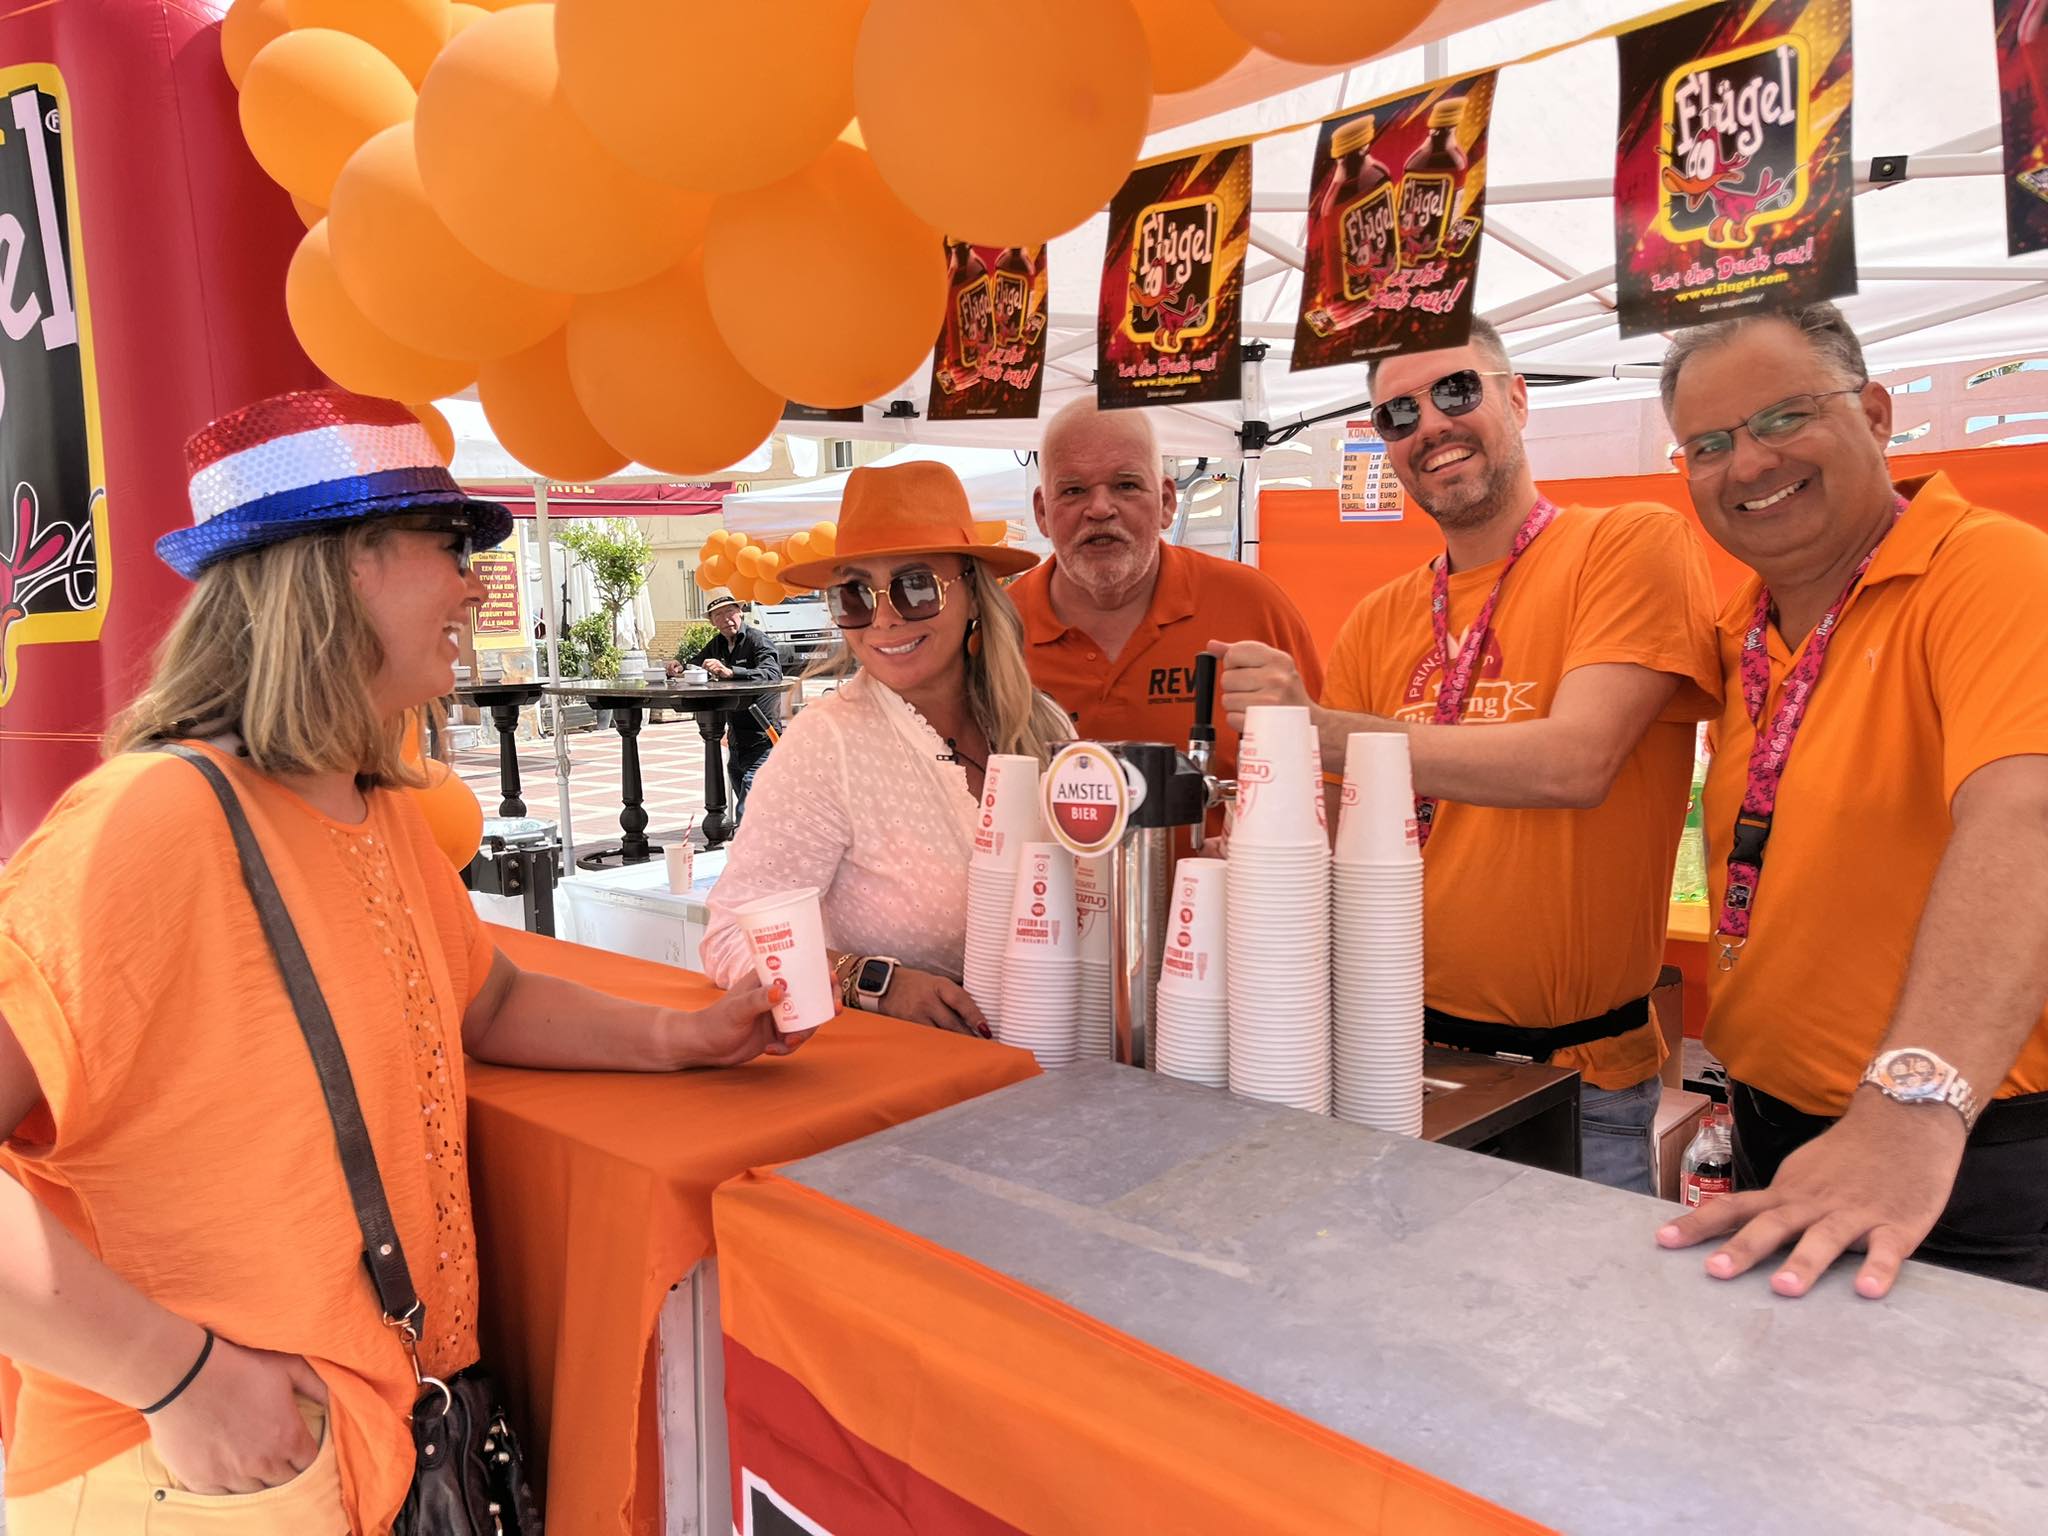 In pictures... King&#039;s Day celebrations on the Costa